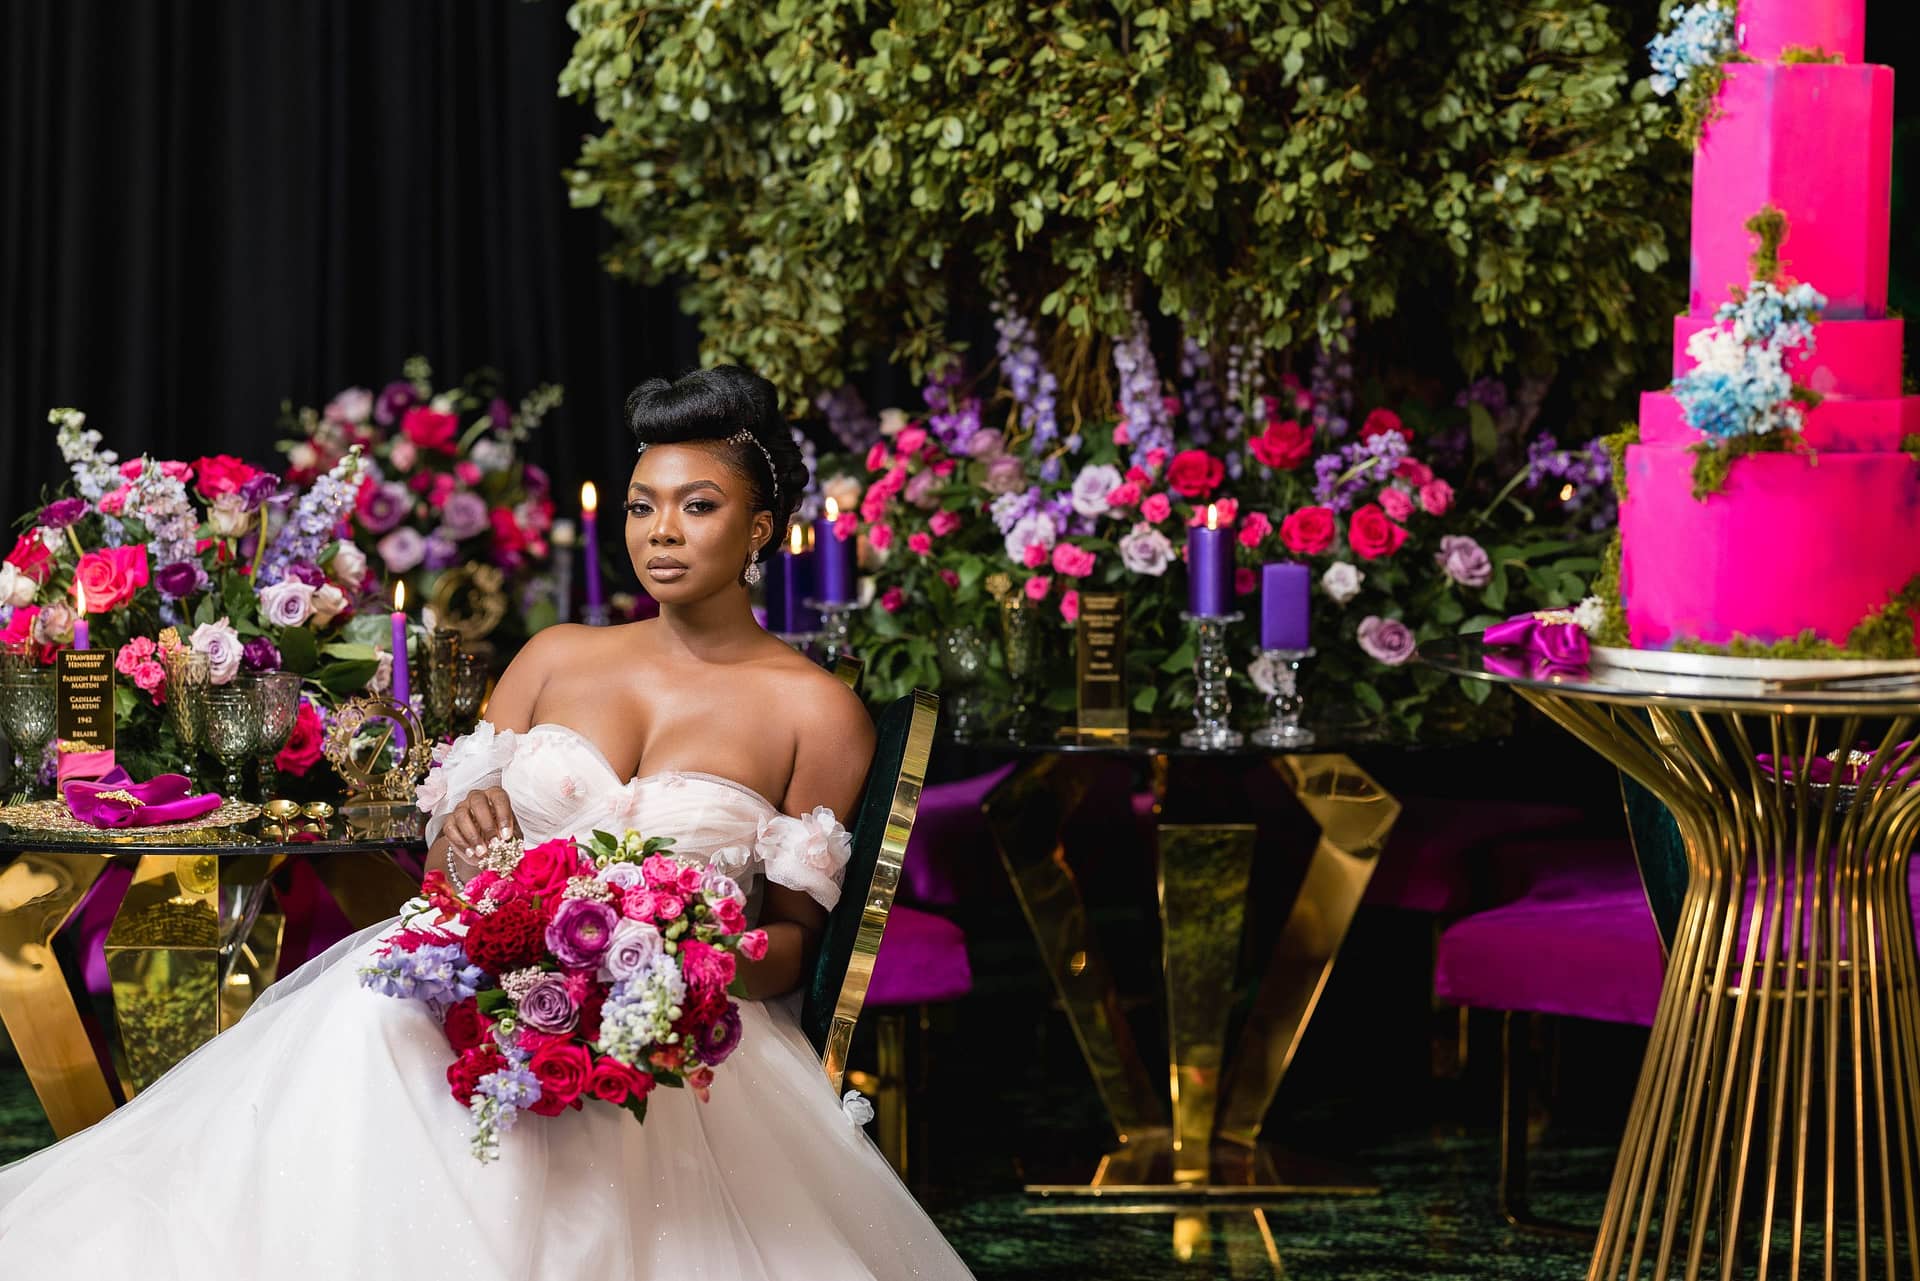 Wedding Trends: Big flowers make for a big impact on your wedding